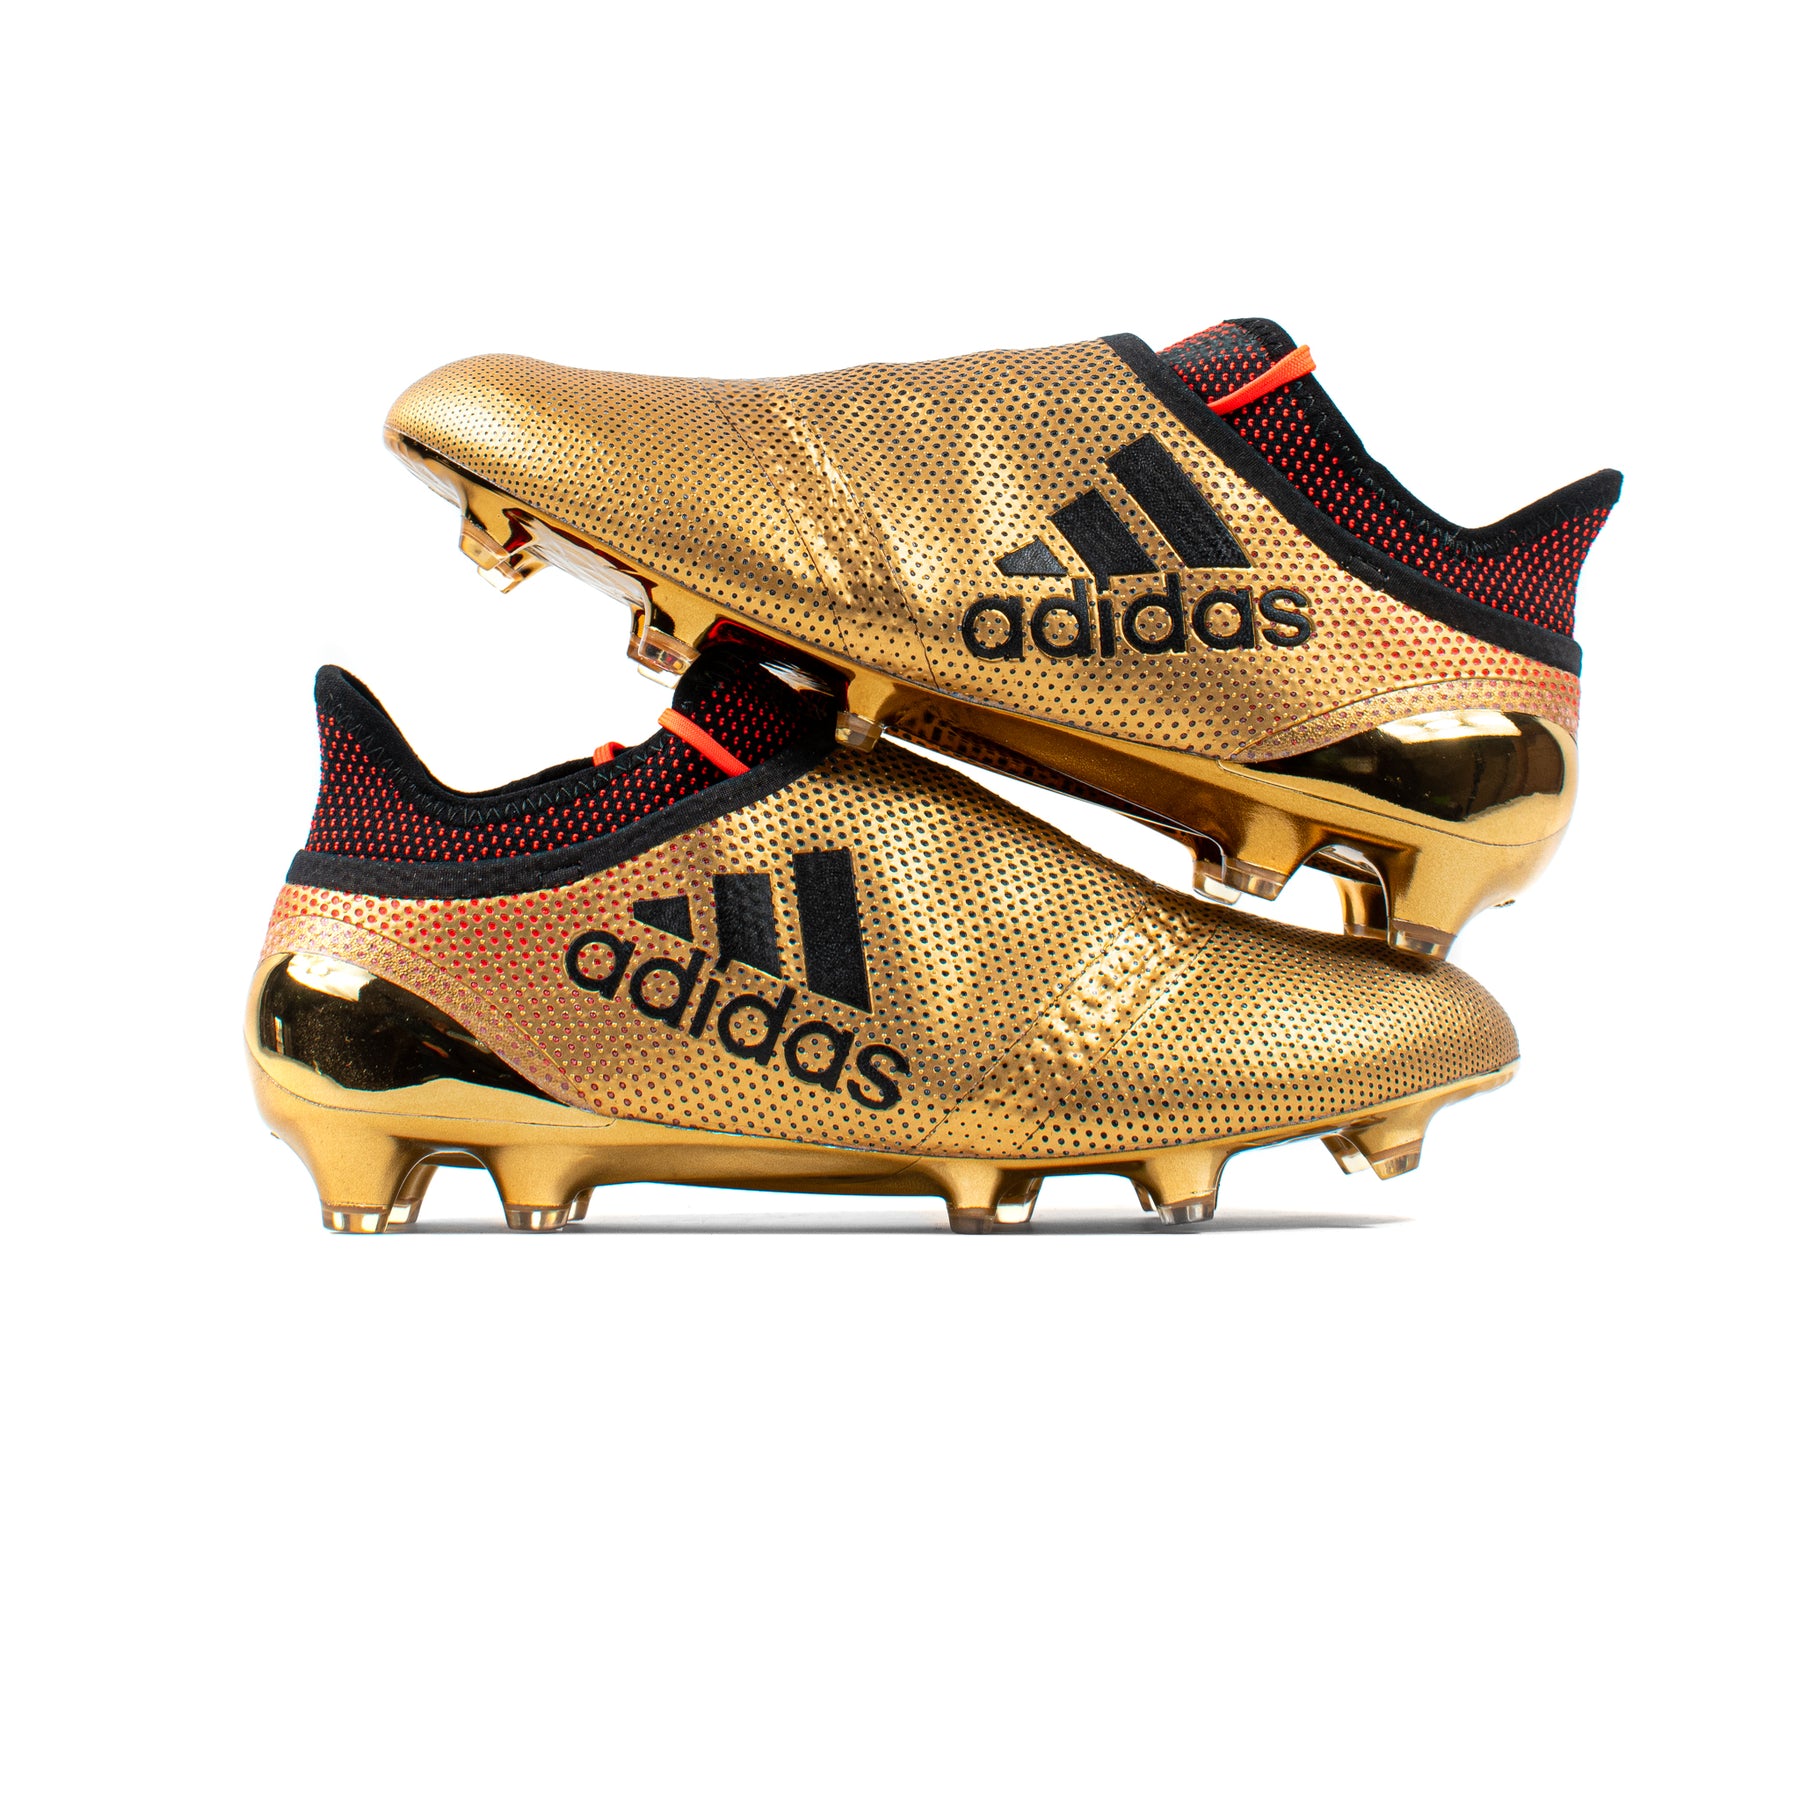 Adidas X 17+ – Classic Soccer Cleats